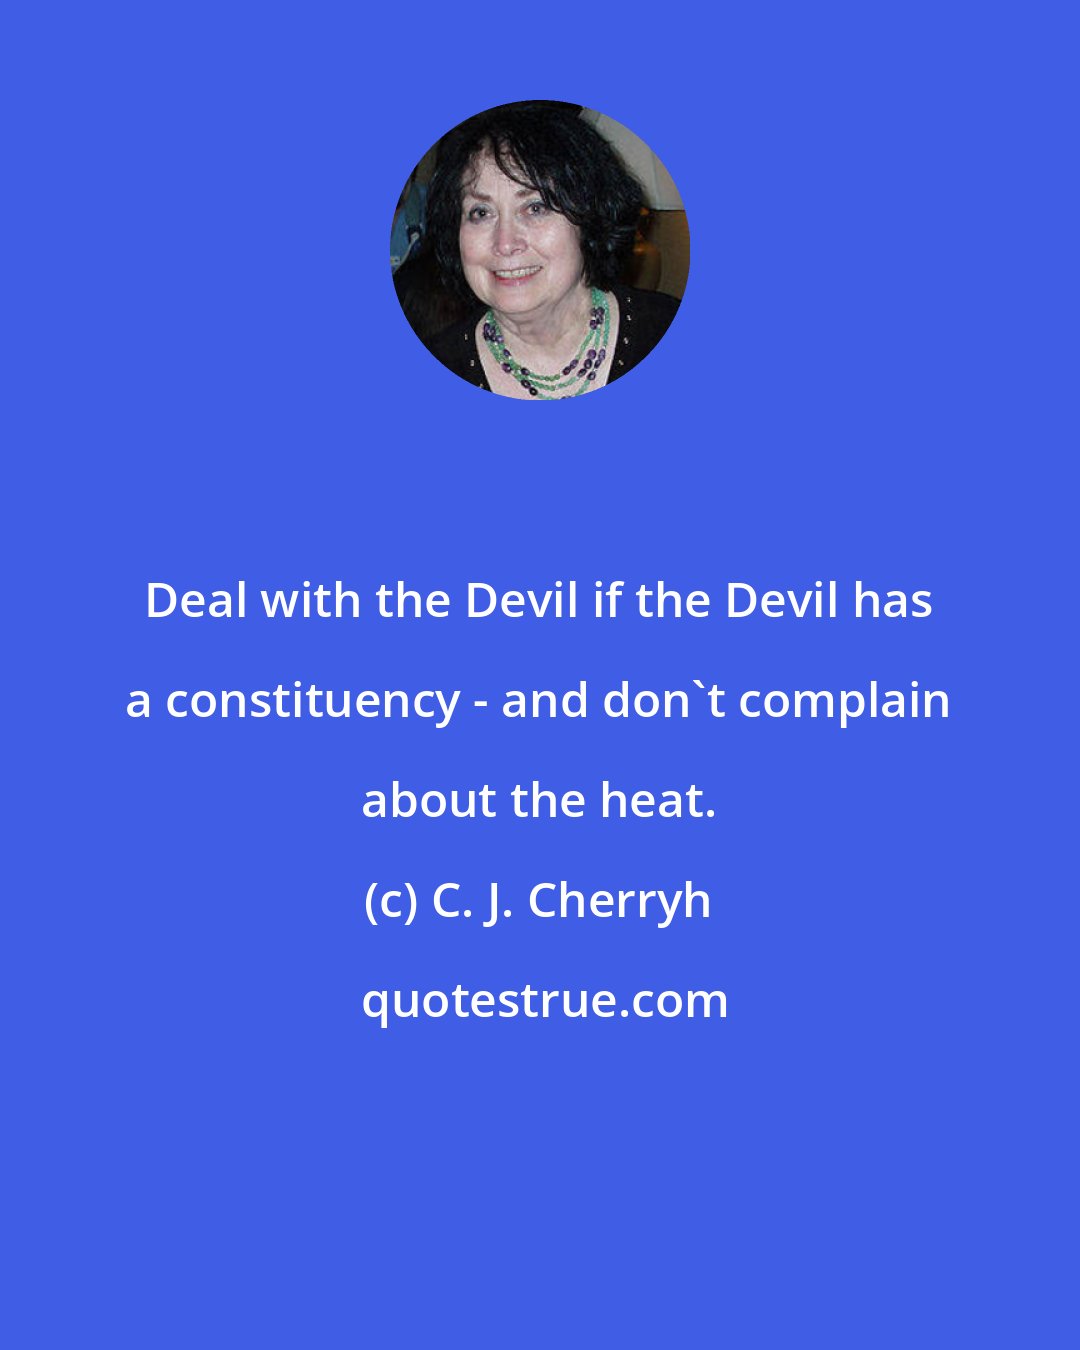 C. J. Cherryh: Deal with the Devil if the Devil has a constituency - and don't complain about the heat.